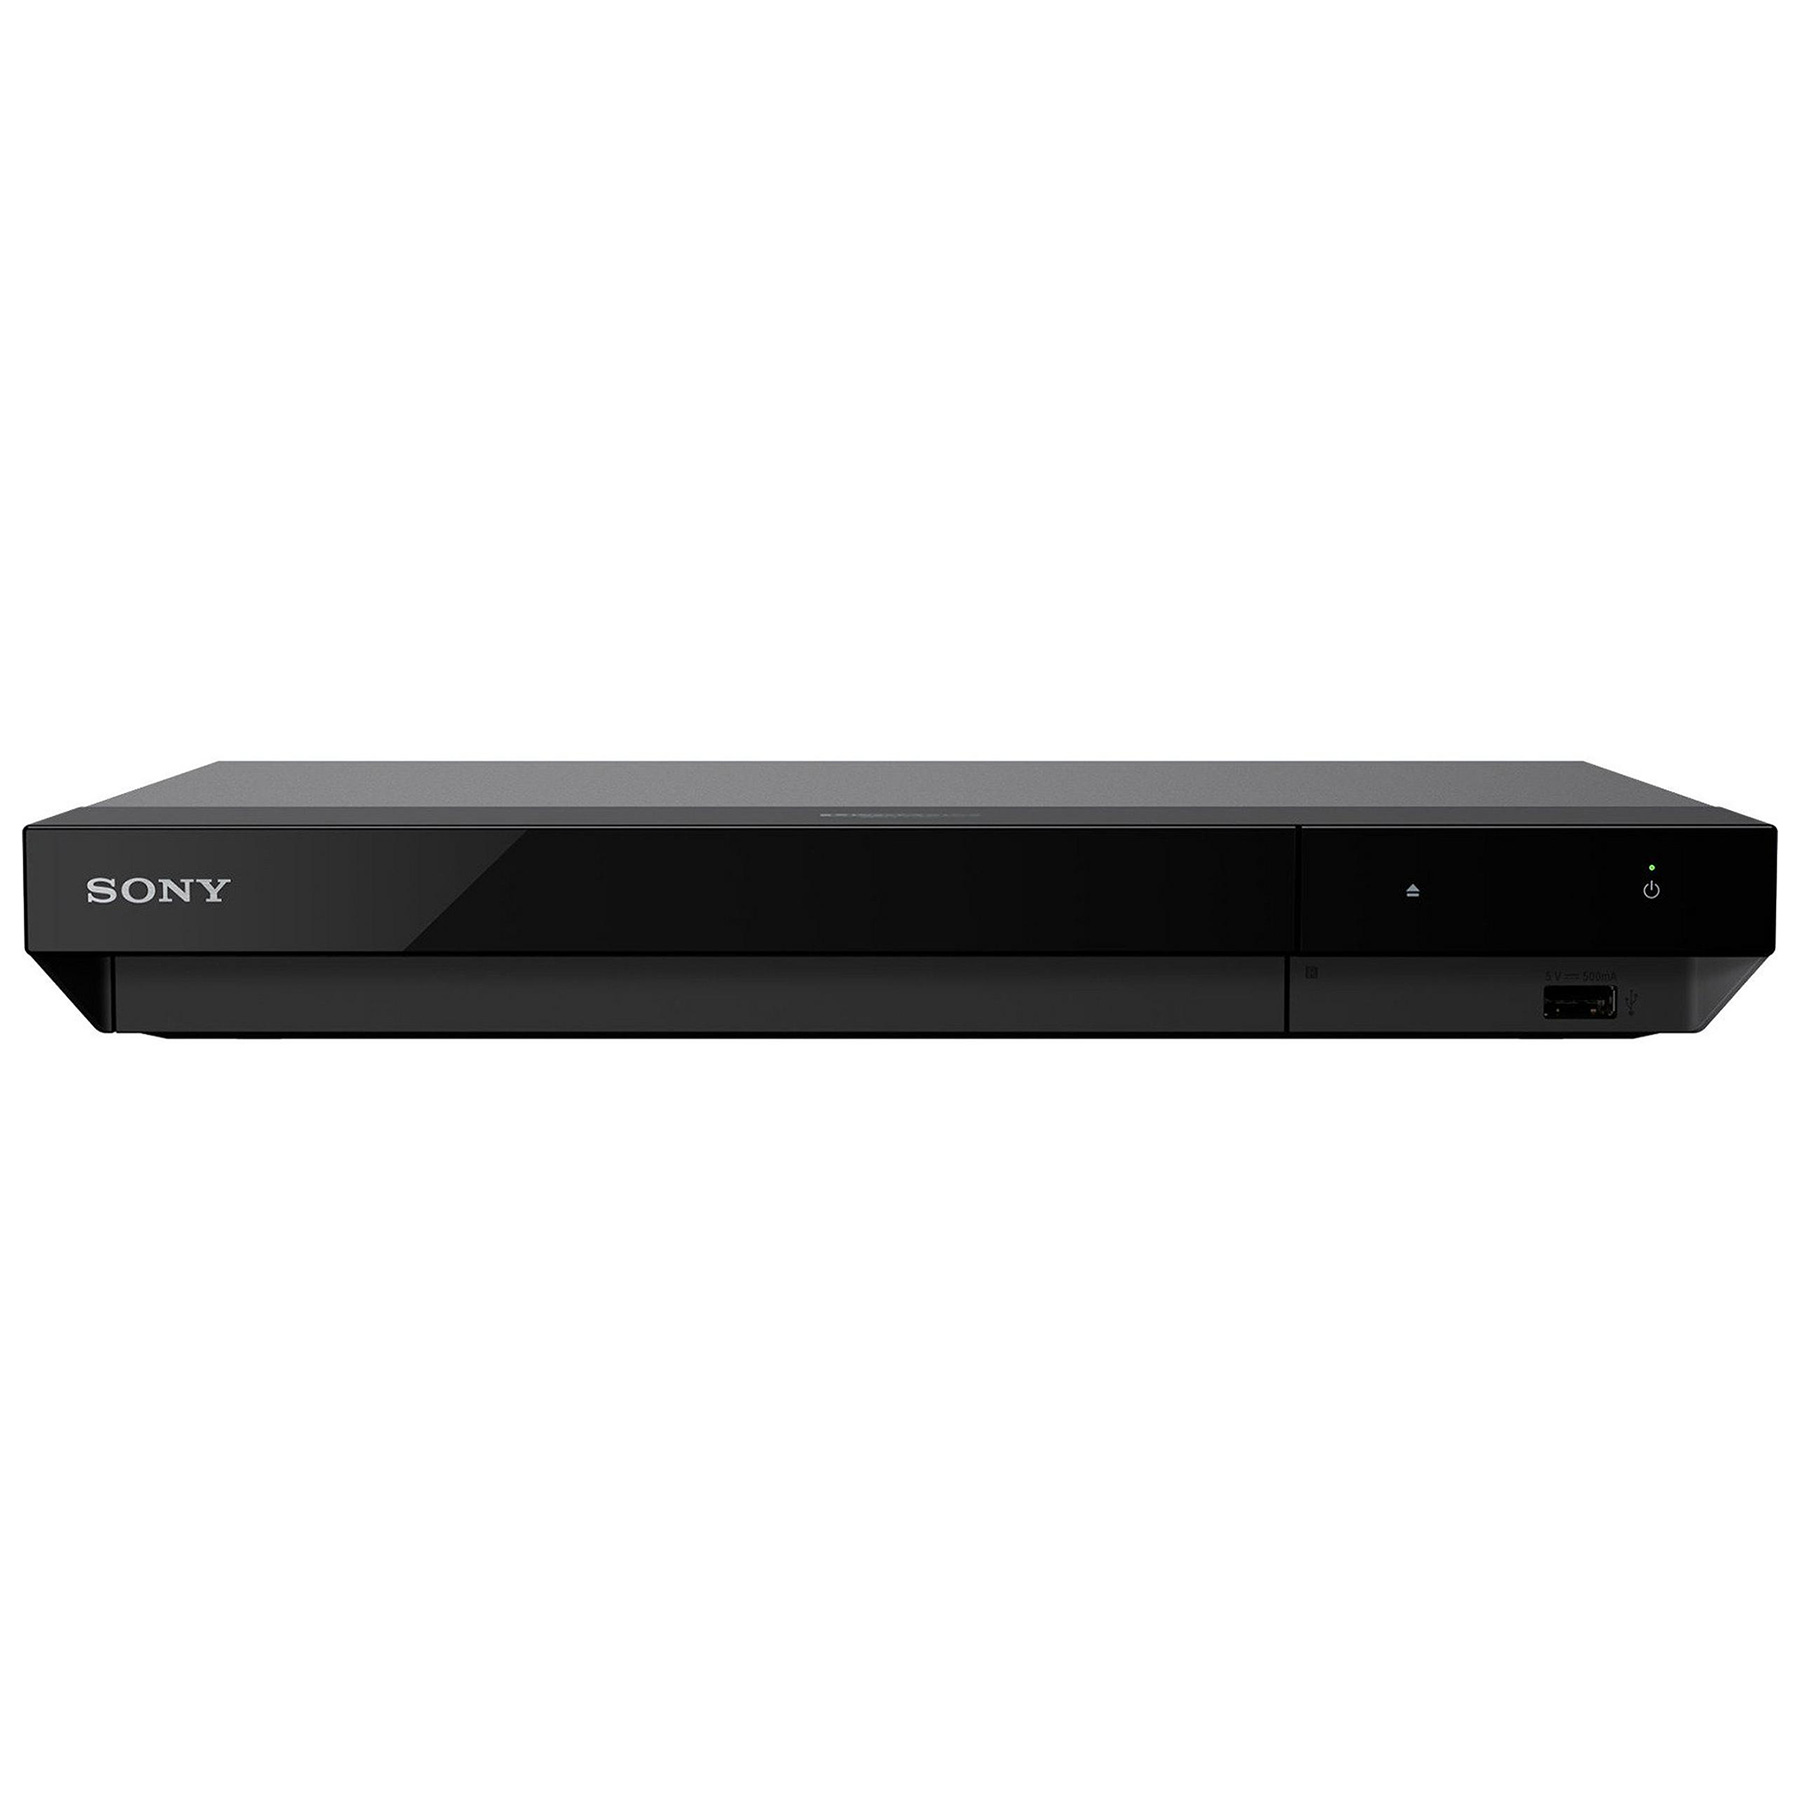 Sony UBPX700B 4K HDR Ultra HD Smart Blu Ray Player with Dolby Vision